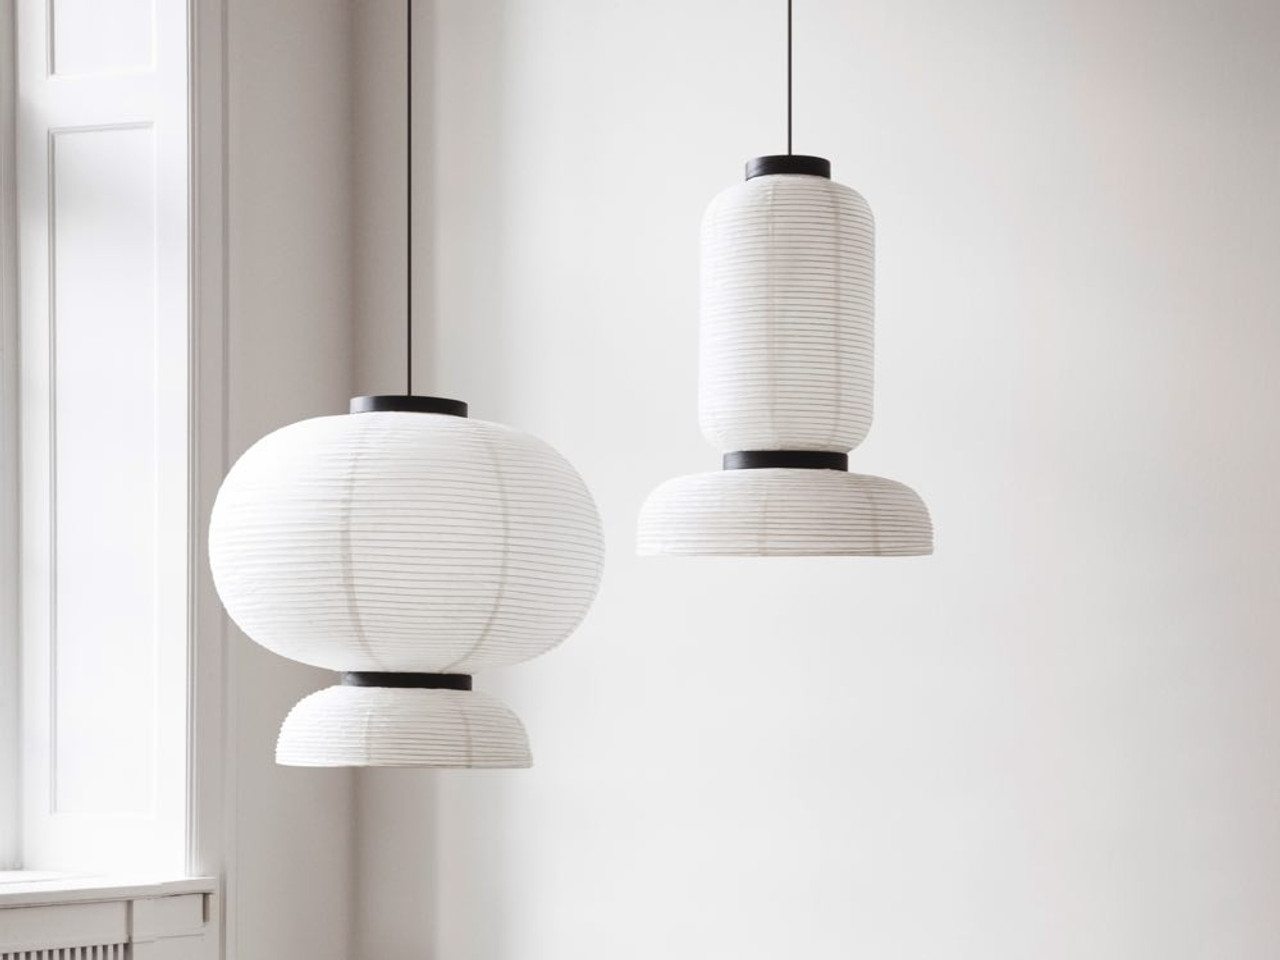 &Tradition JH3 Pendant Light by Jaime Hayon